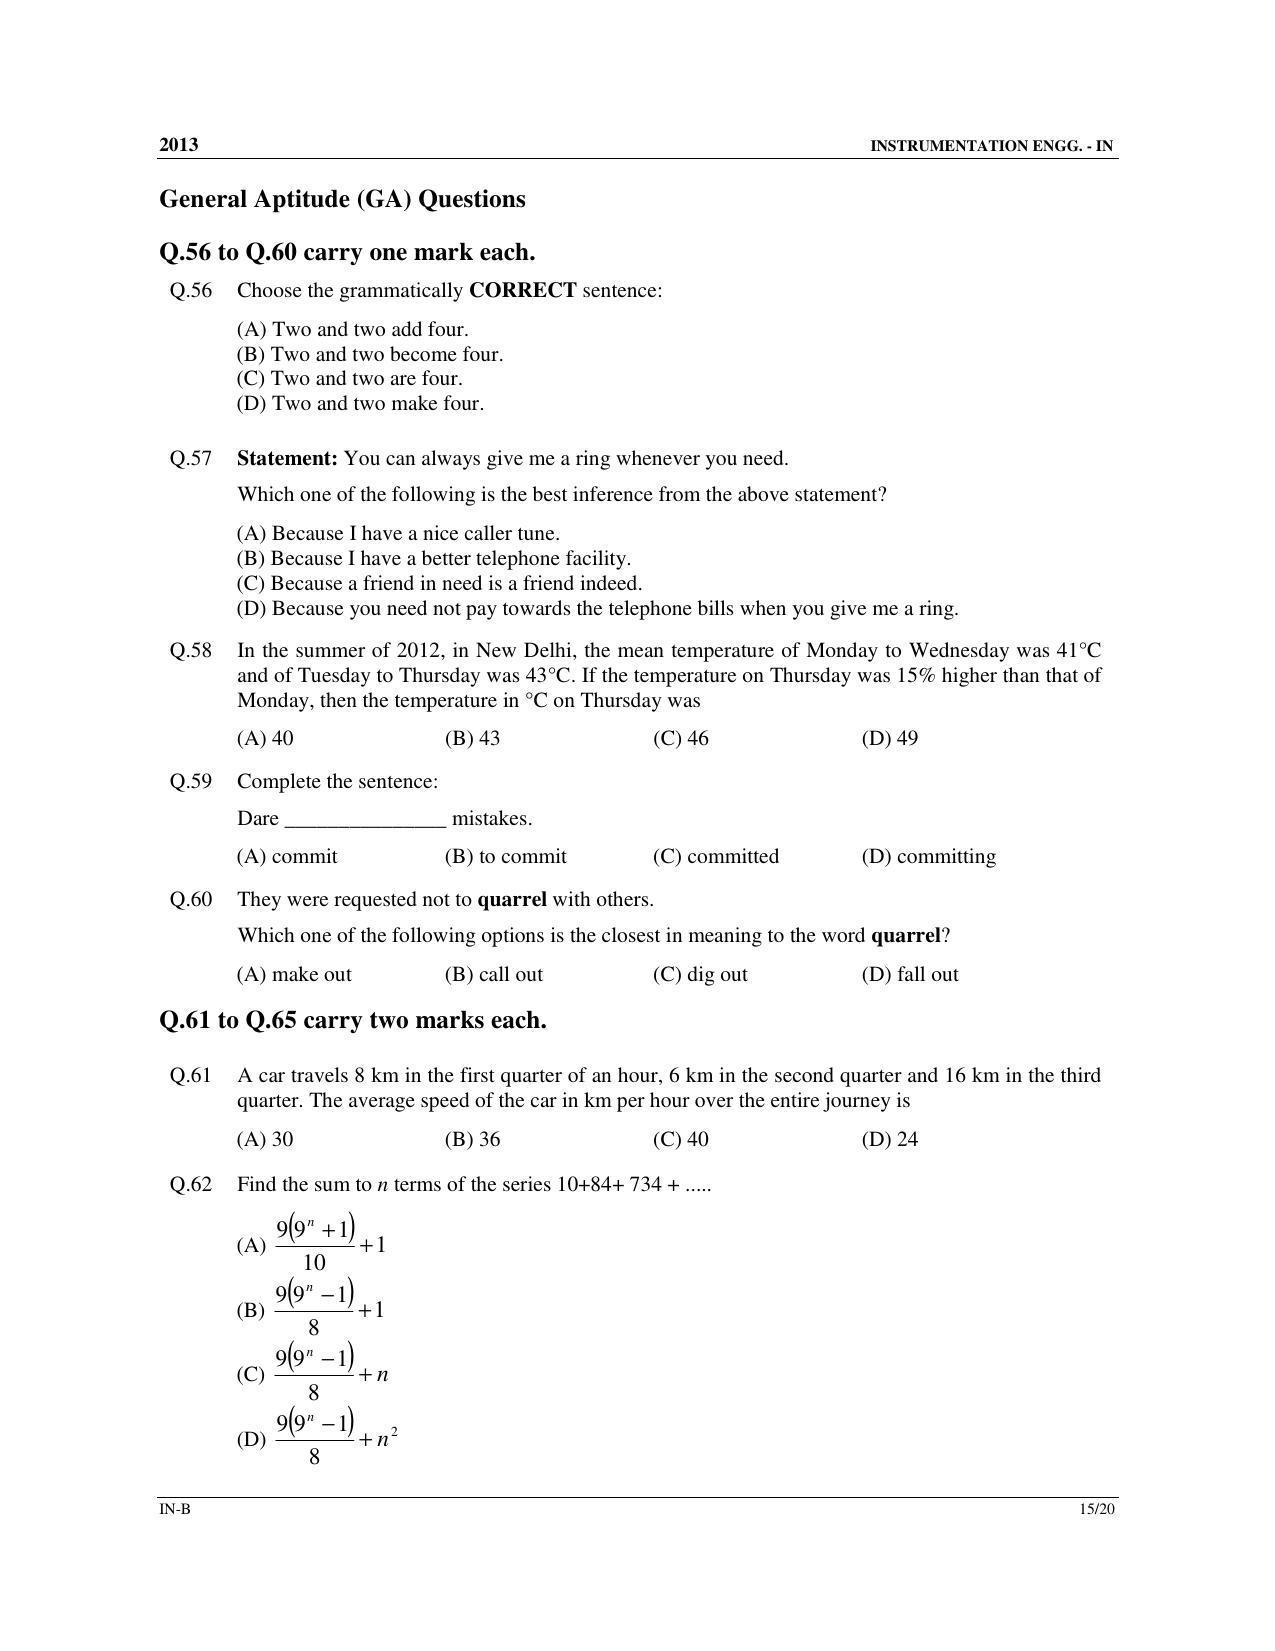 GATE 2013 Instrumentation Engineering (IN) Question Paper with Answer Key - Page 33